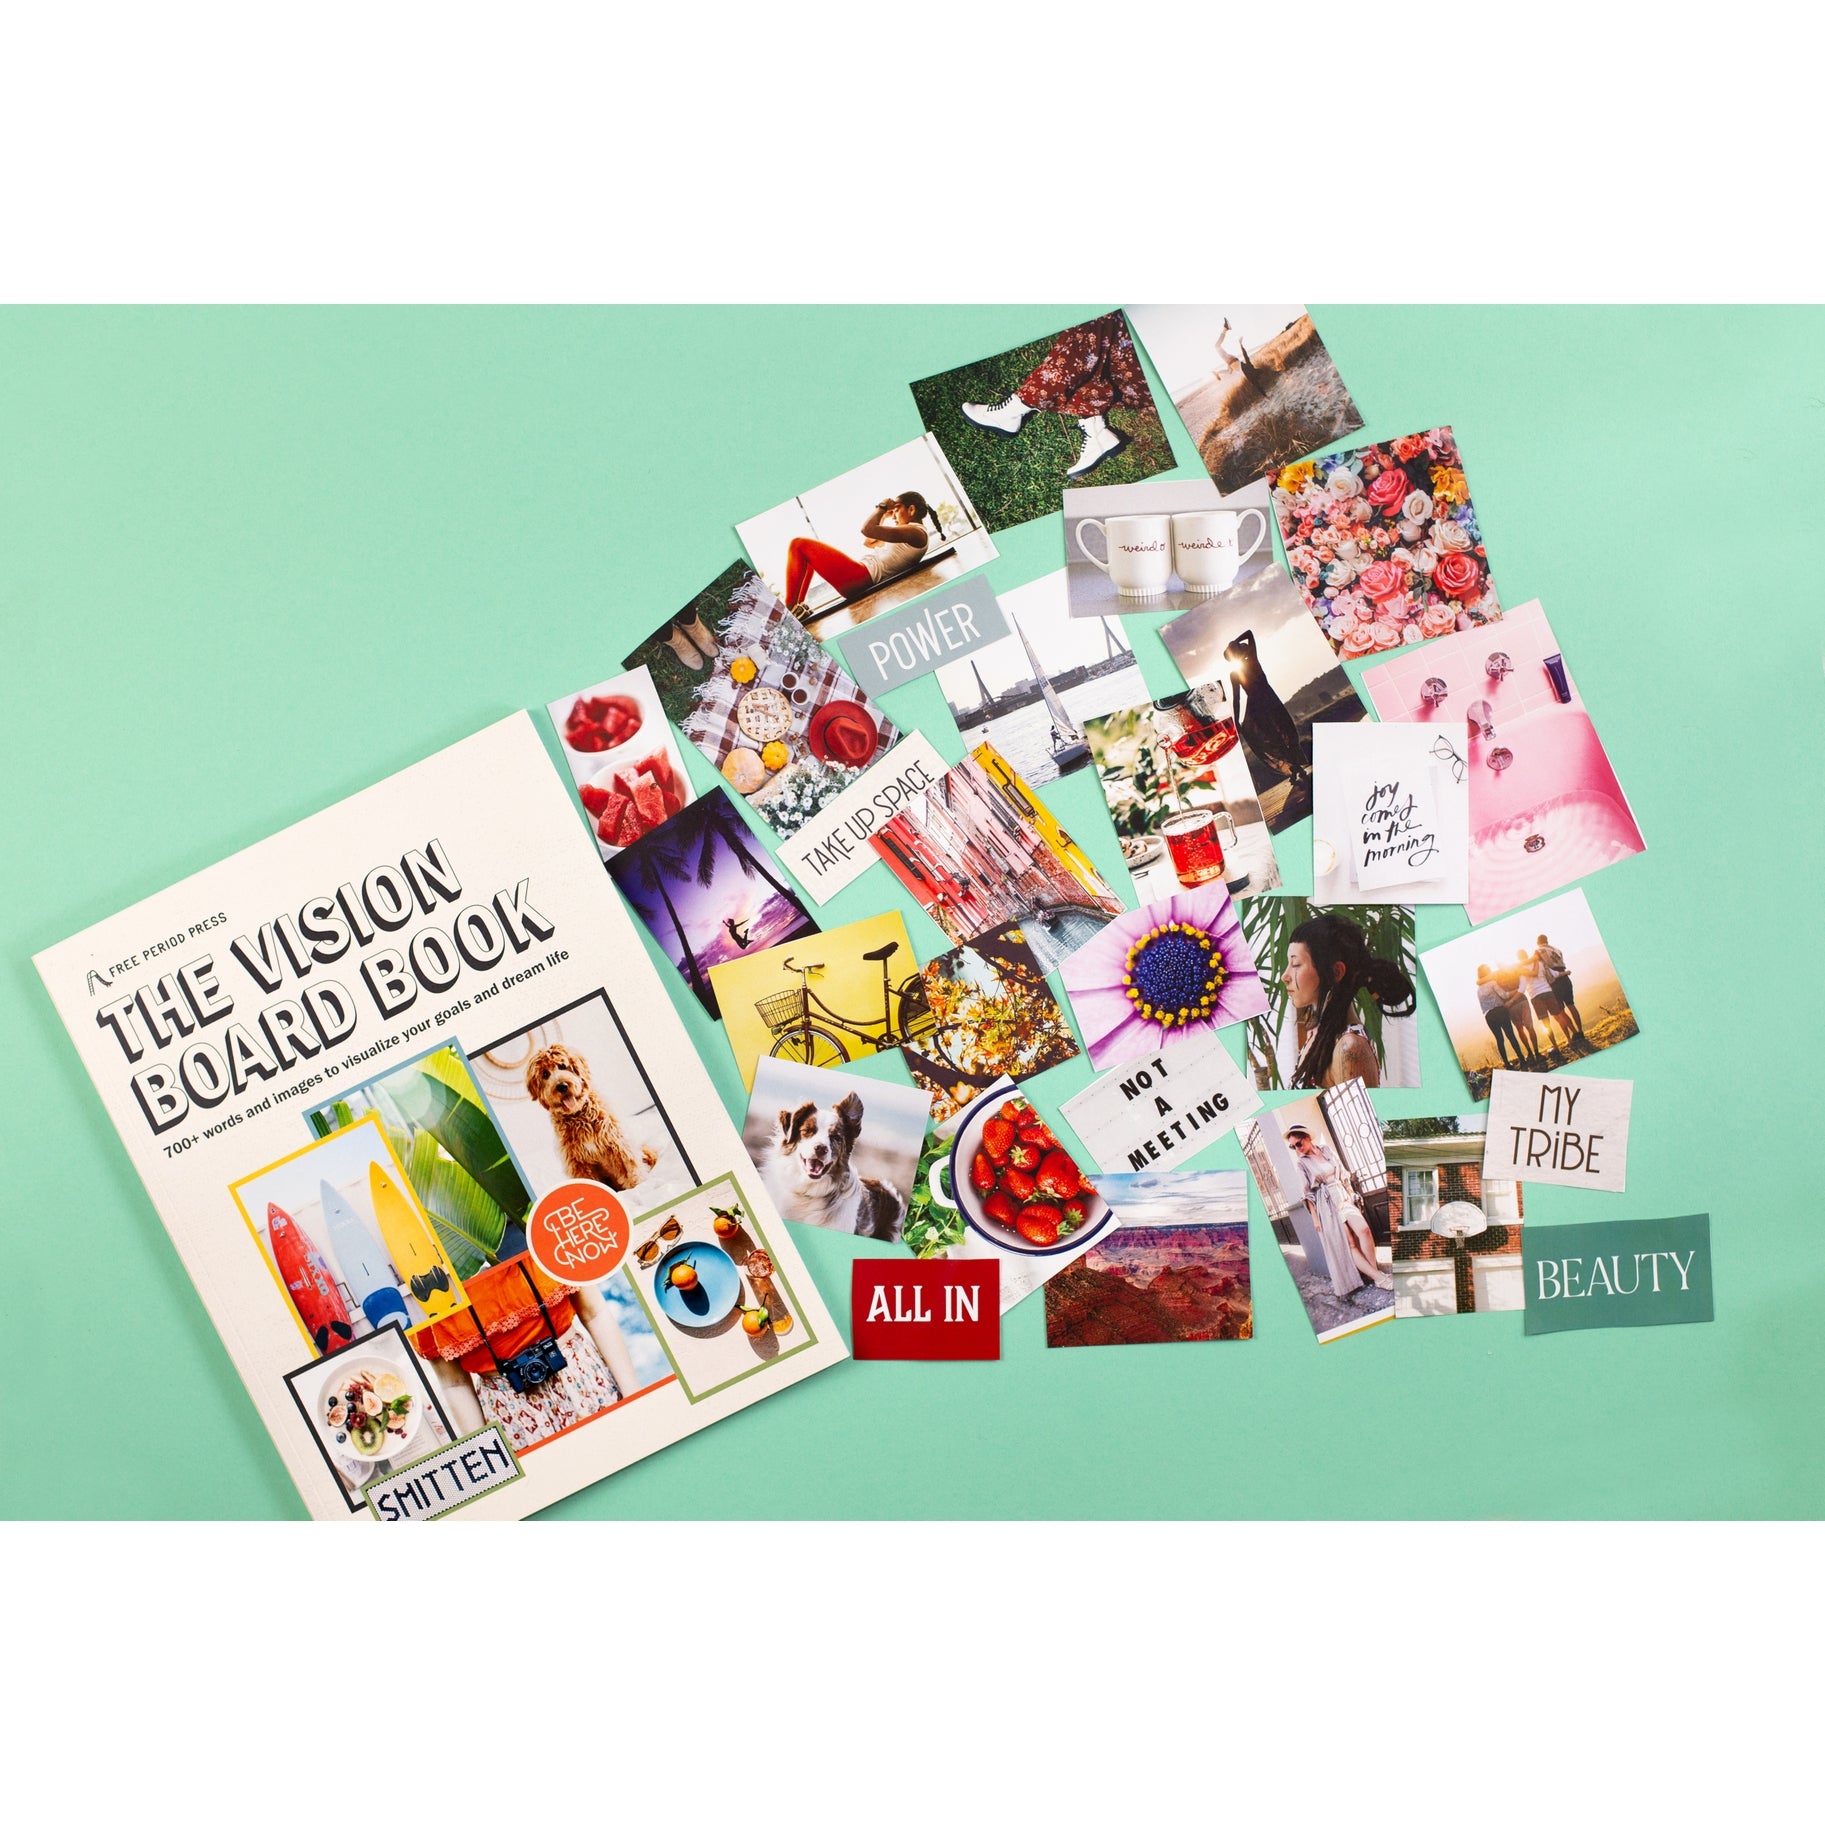 The Vision Board Book: 700+ words and images to visualize your